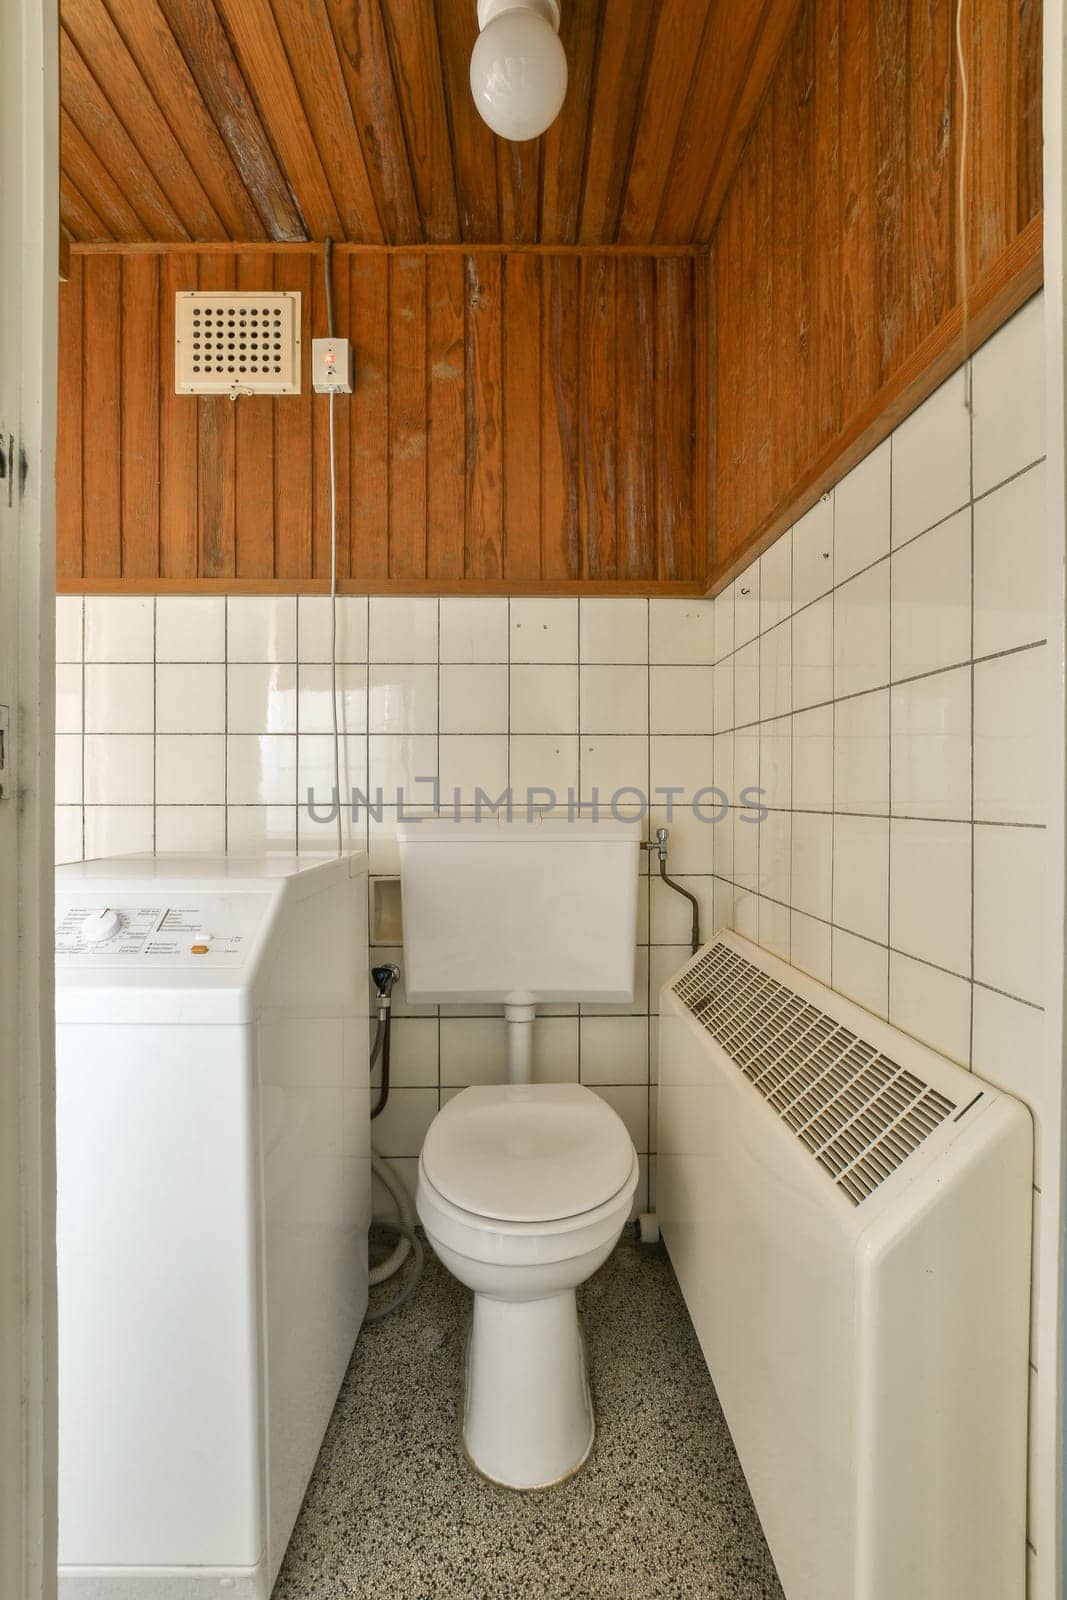 a small bathroom with wood paneled walls and white tile on the floor, there is a toilet in the corner